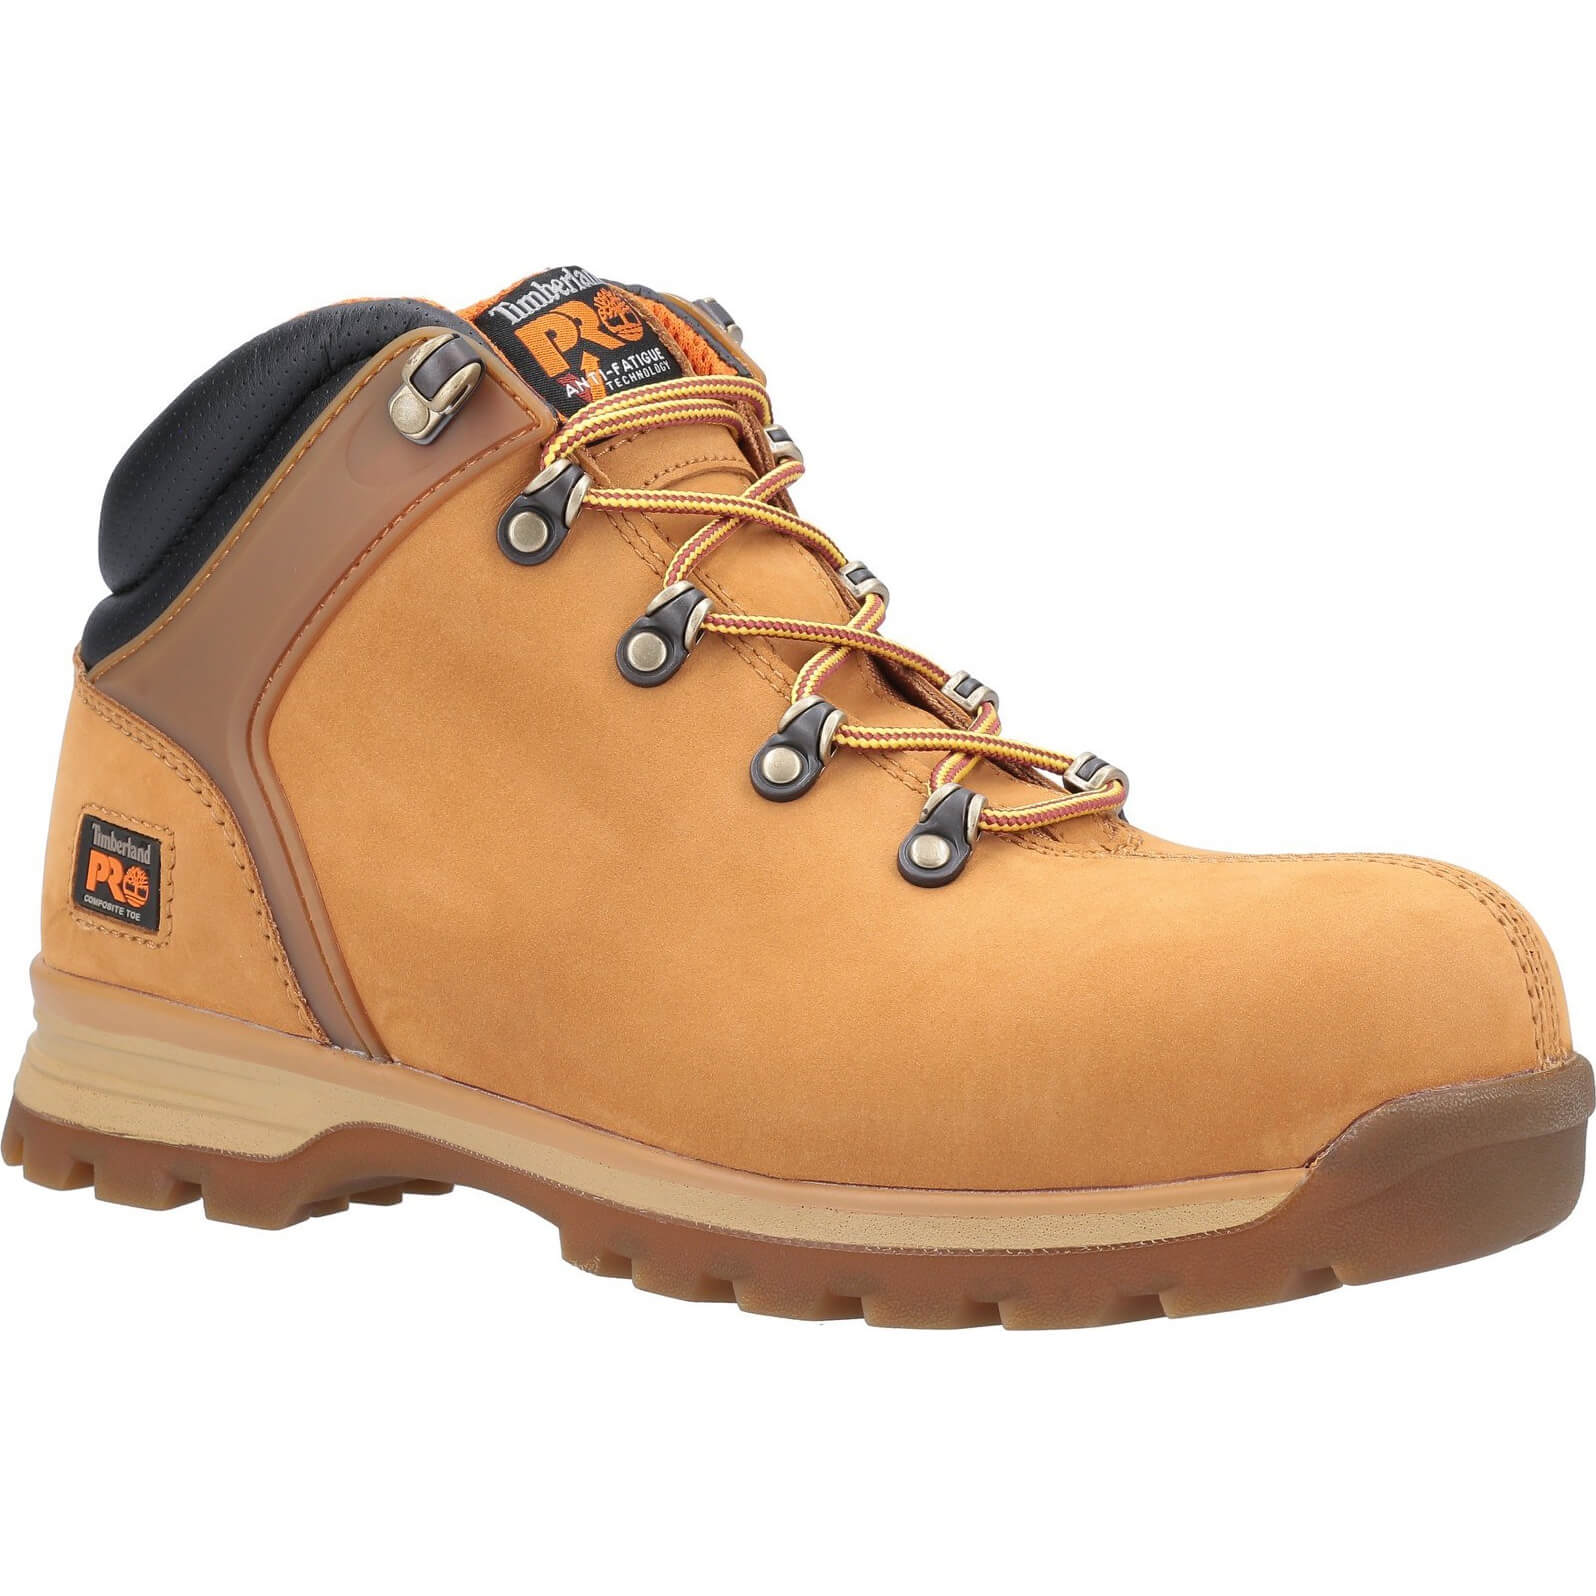 Image of Timberland Pro Splitrock XT Composite Safety Toe Work Boot Wheat Size 7